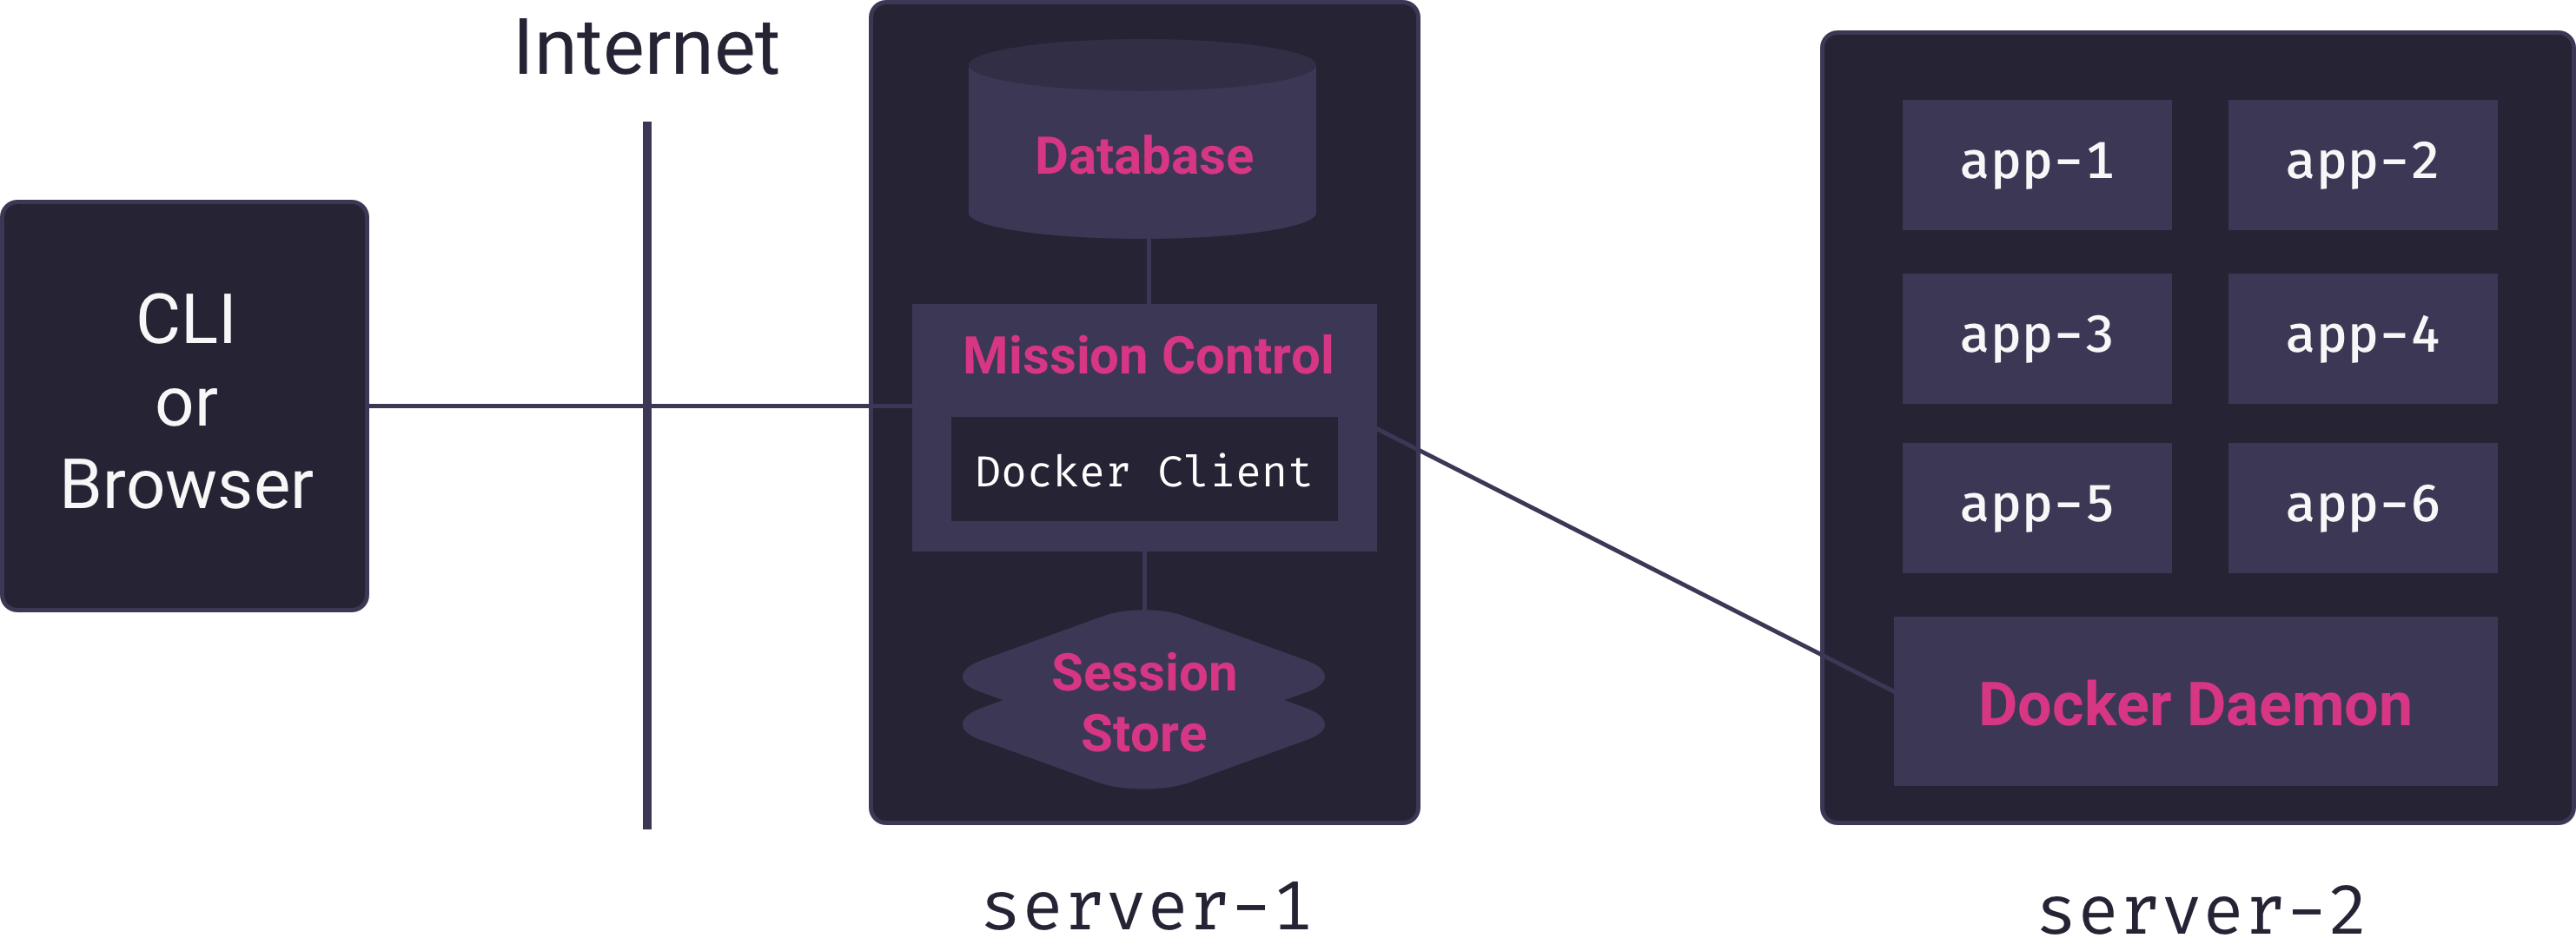 Mission Control service connecting to remote Docker host